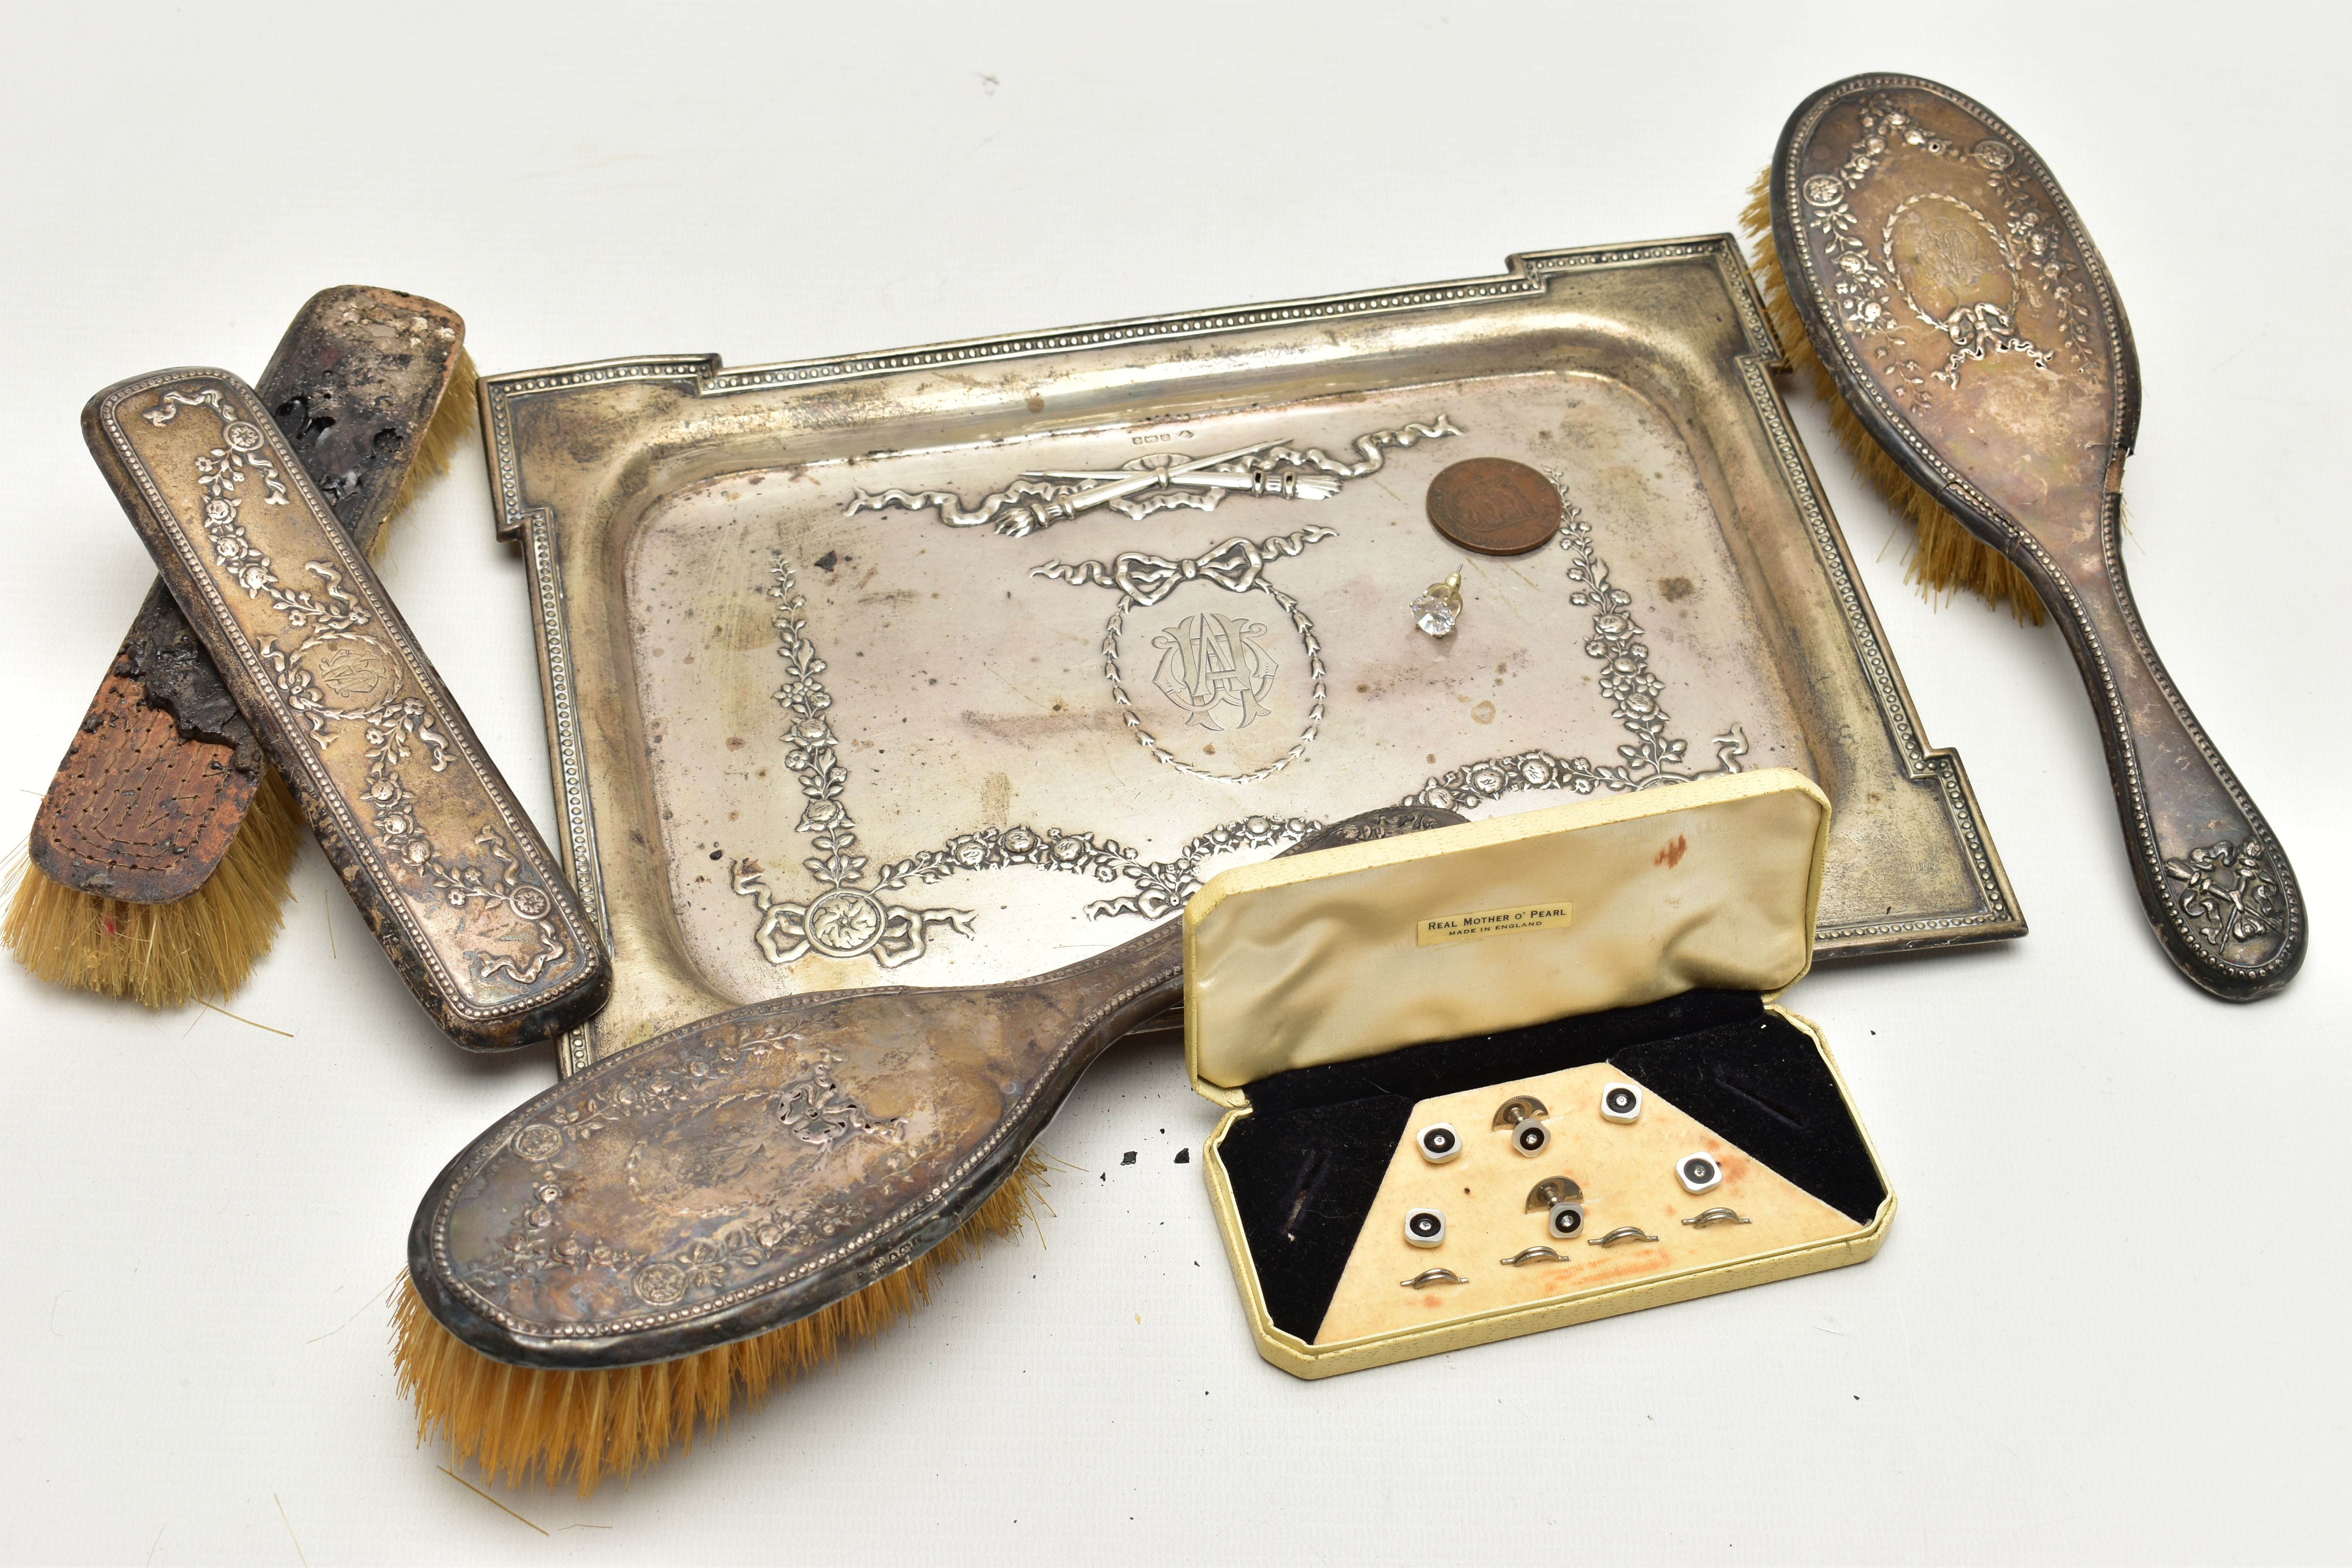 AN EARLY 20TH CENTURY SILVER TRAY AND VANITY PIECES, the tray of a rectangular form, decorated